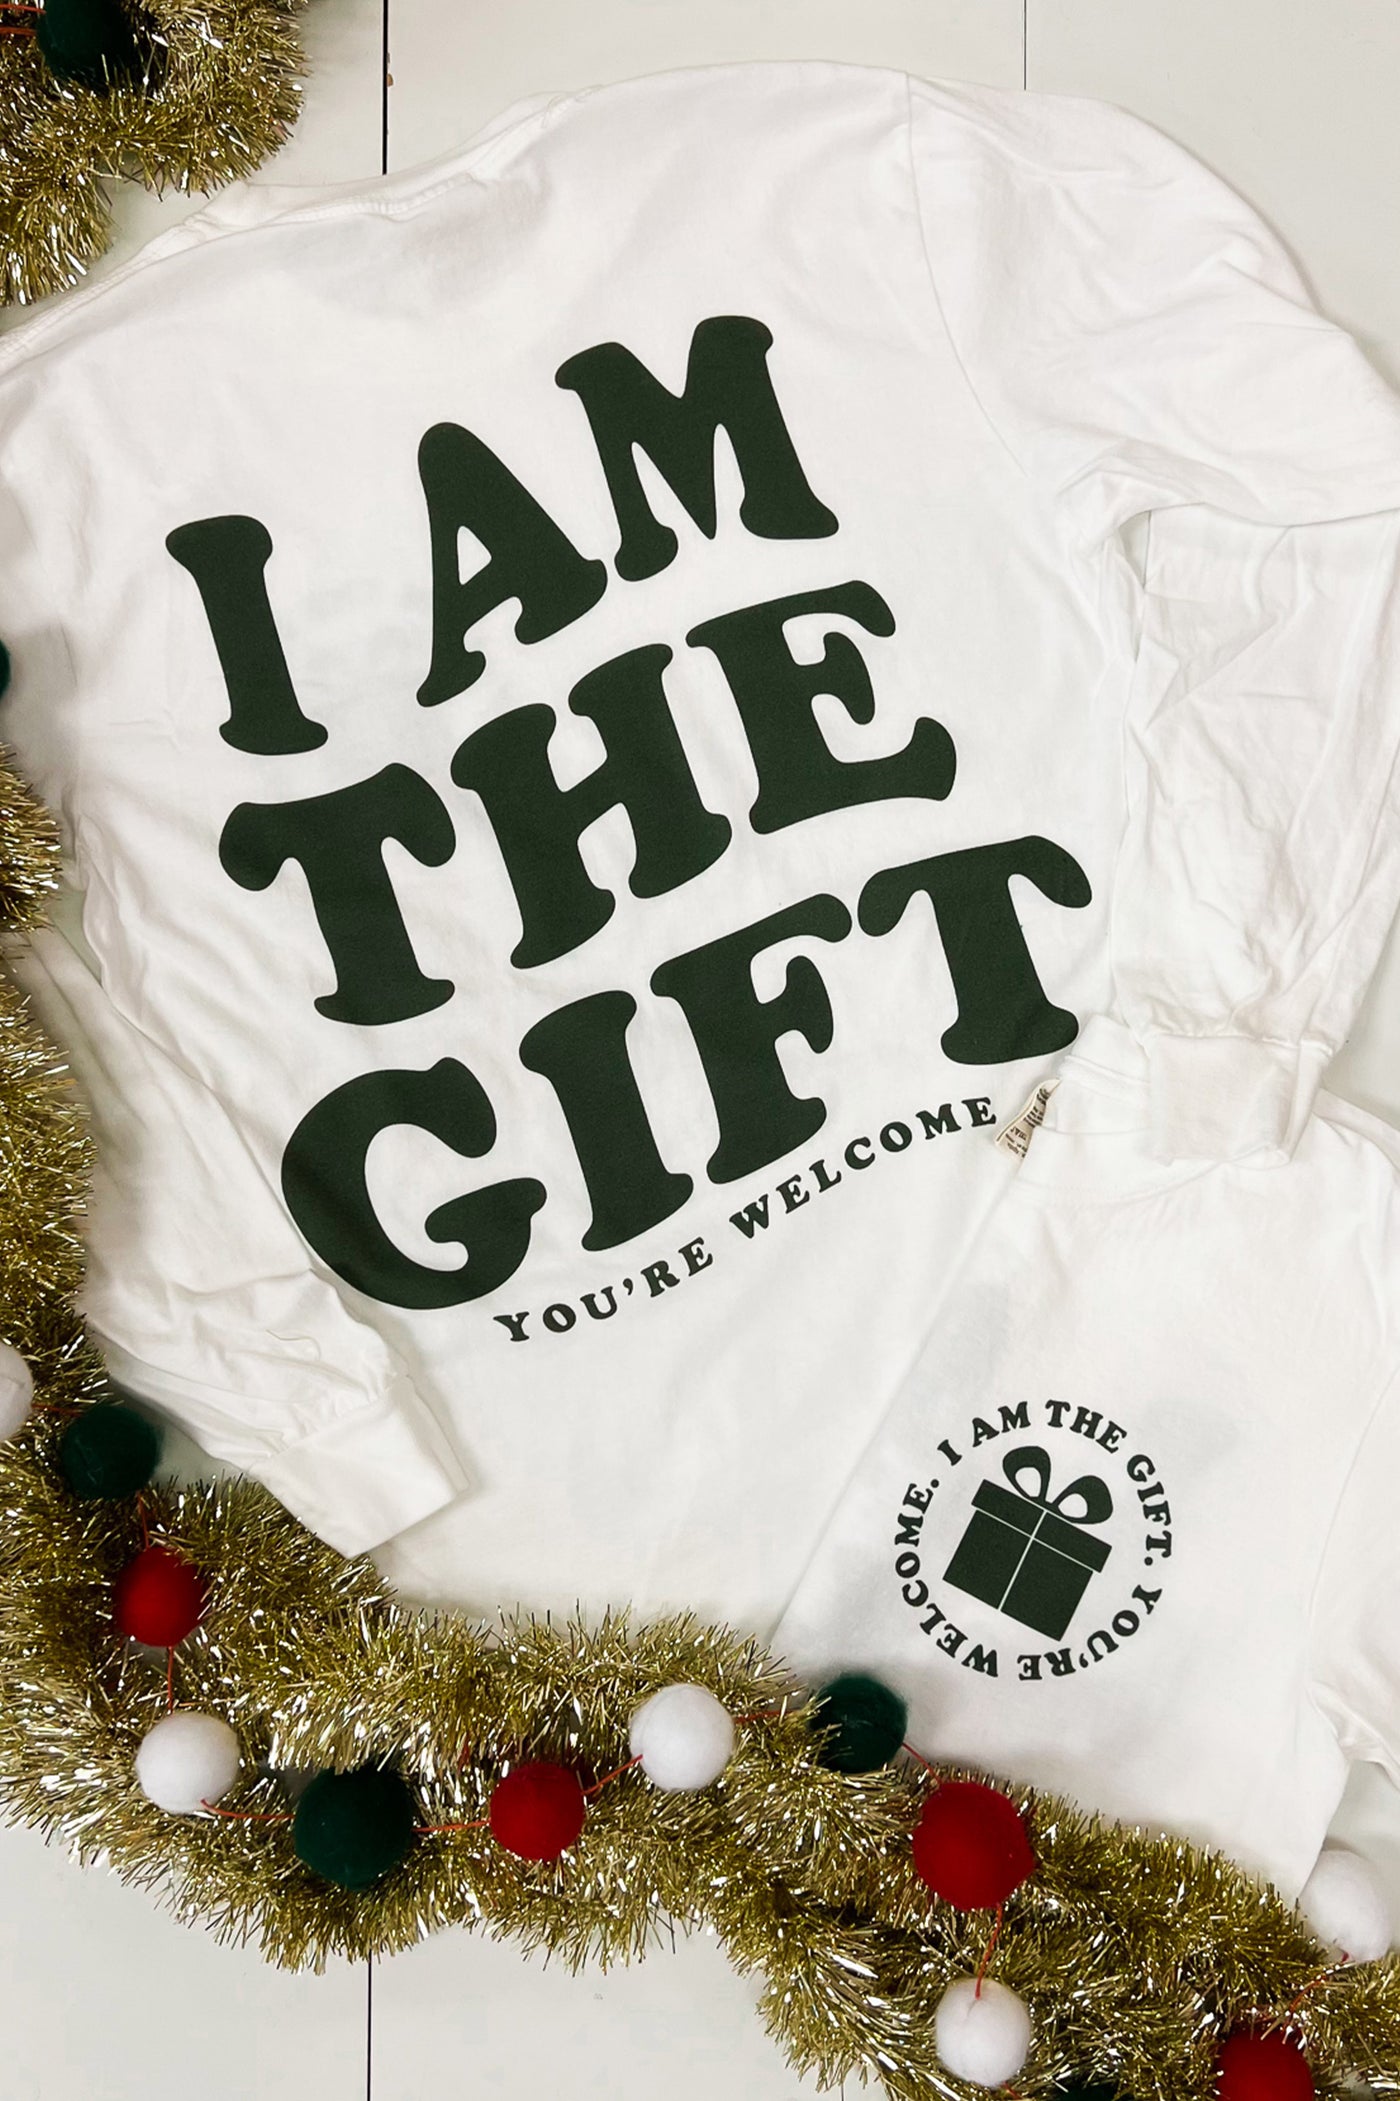 I AM THE GIFT- COMFORT COLOR TEES